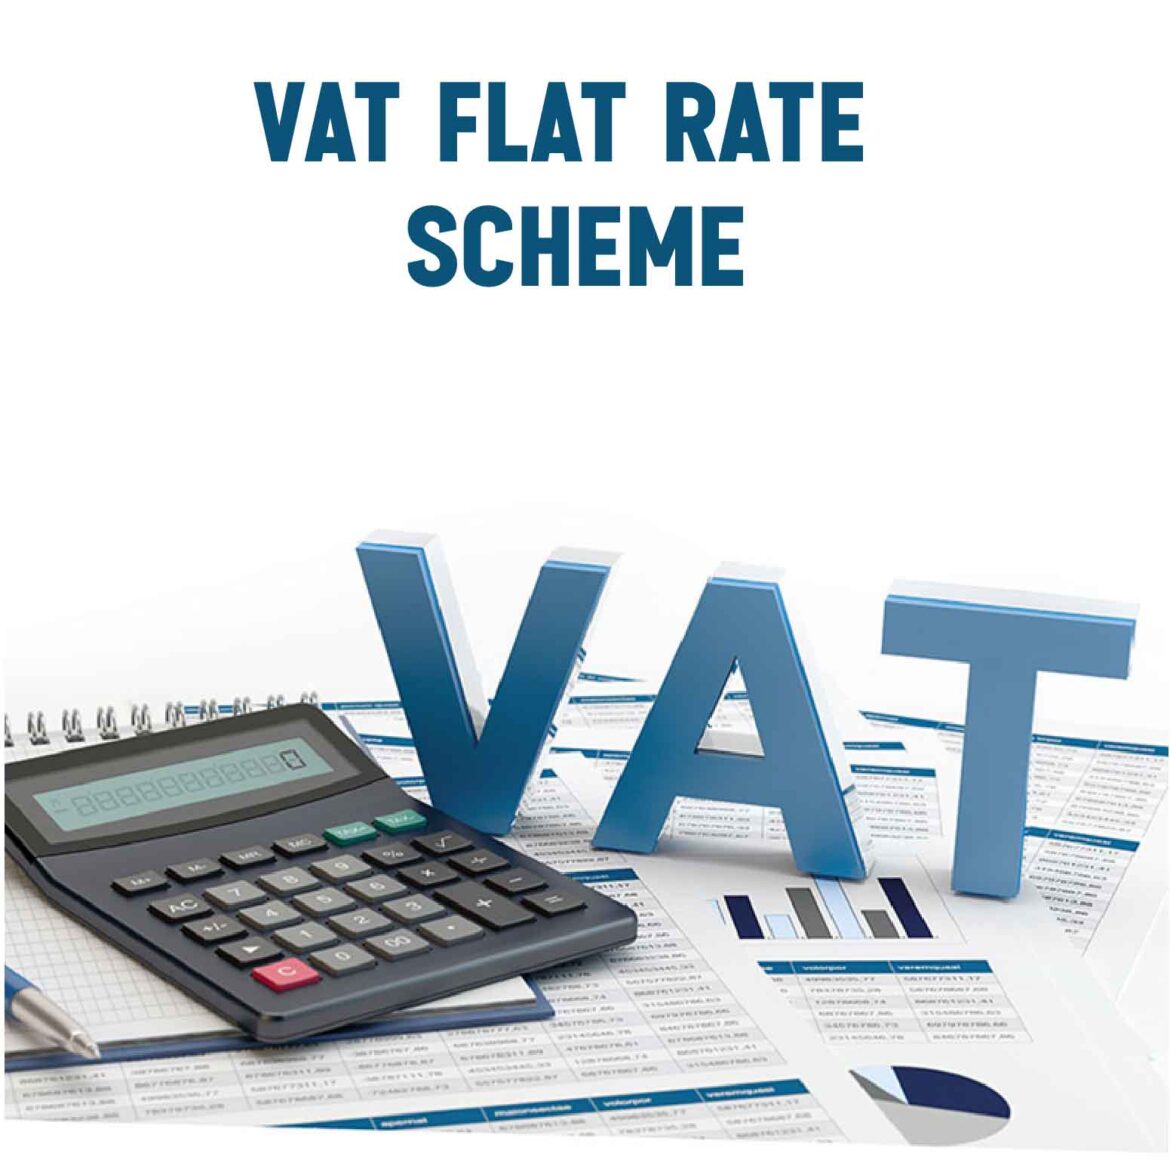 Vat flat rate: how cost trader test affects it?